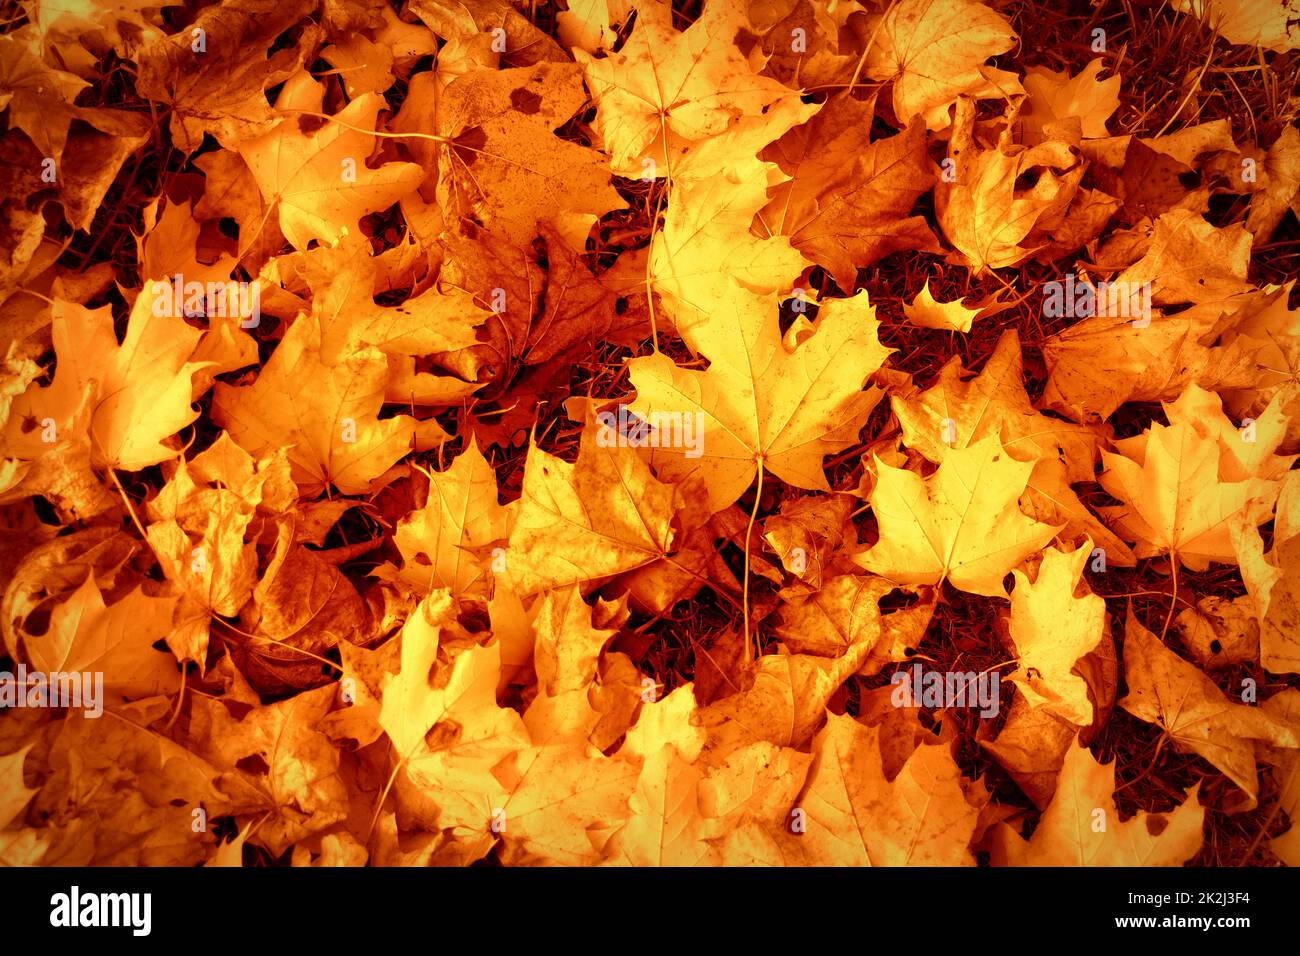 Autumn leaves background. Colorful backround image of fallen autumn leaves perfect for seasonal use. Stock Photo